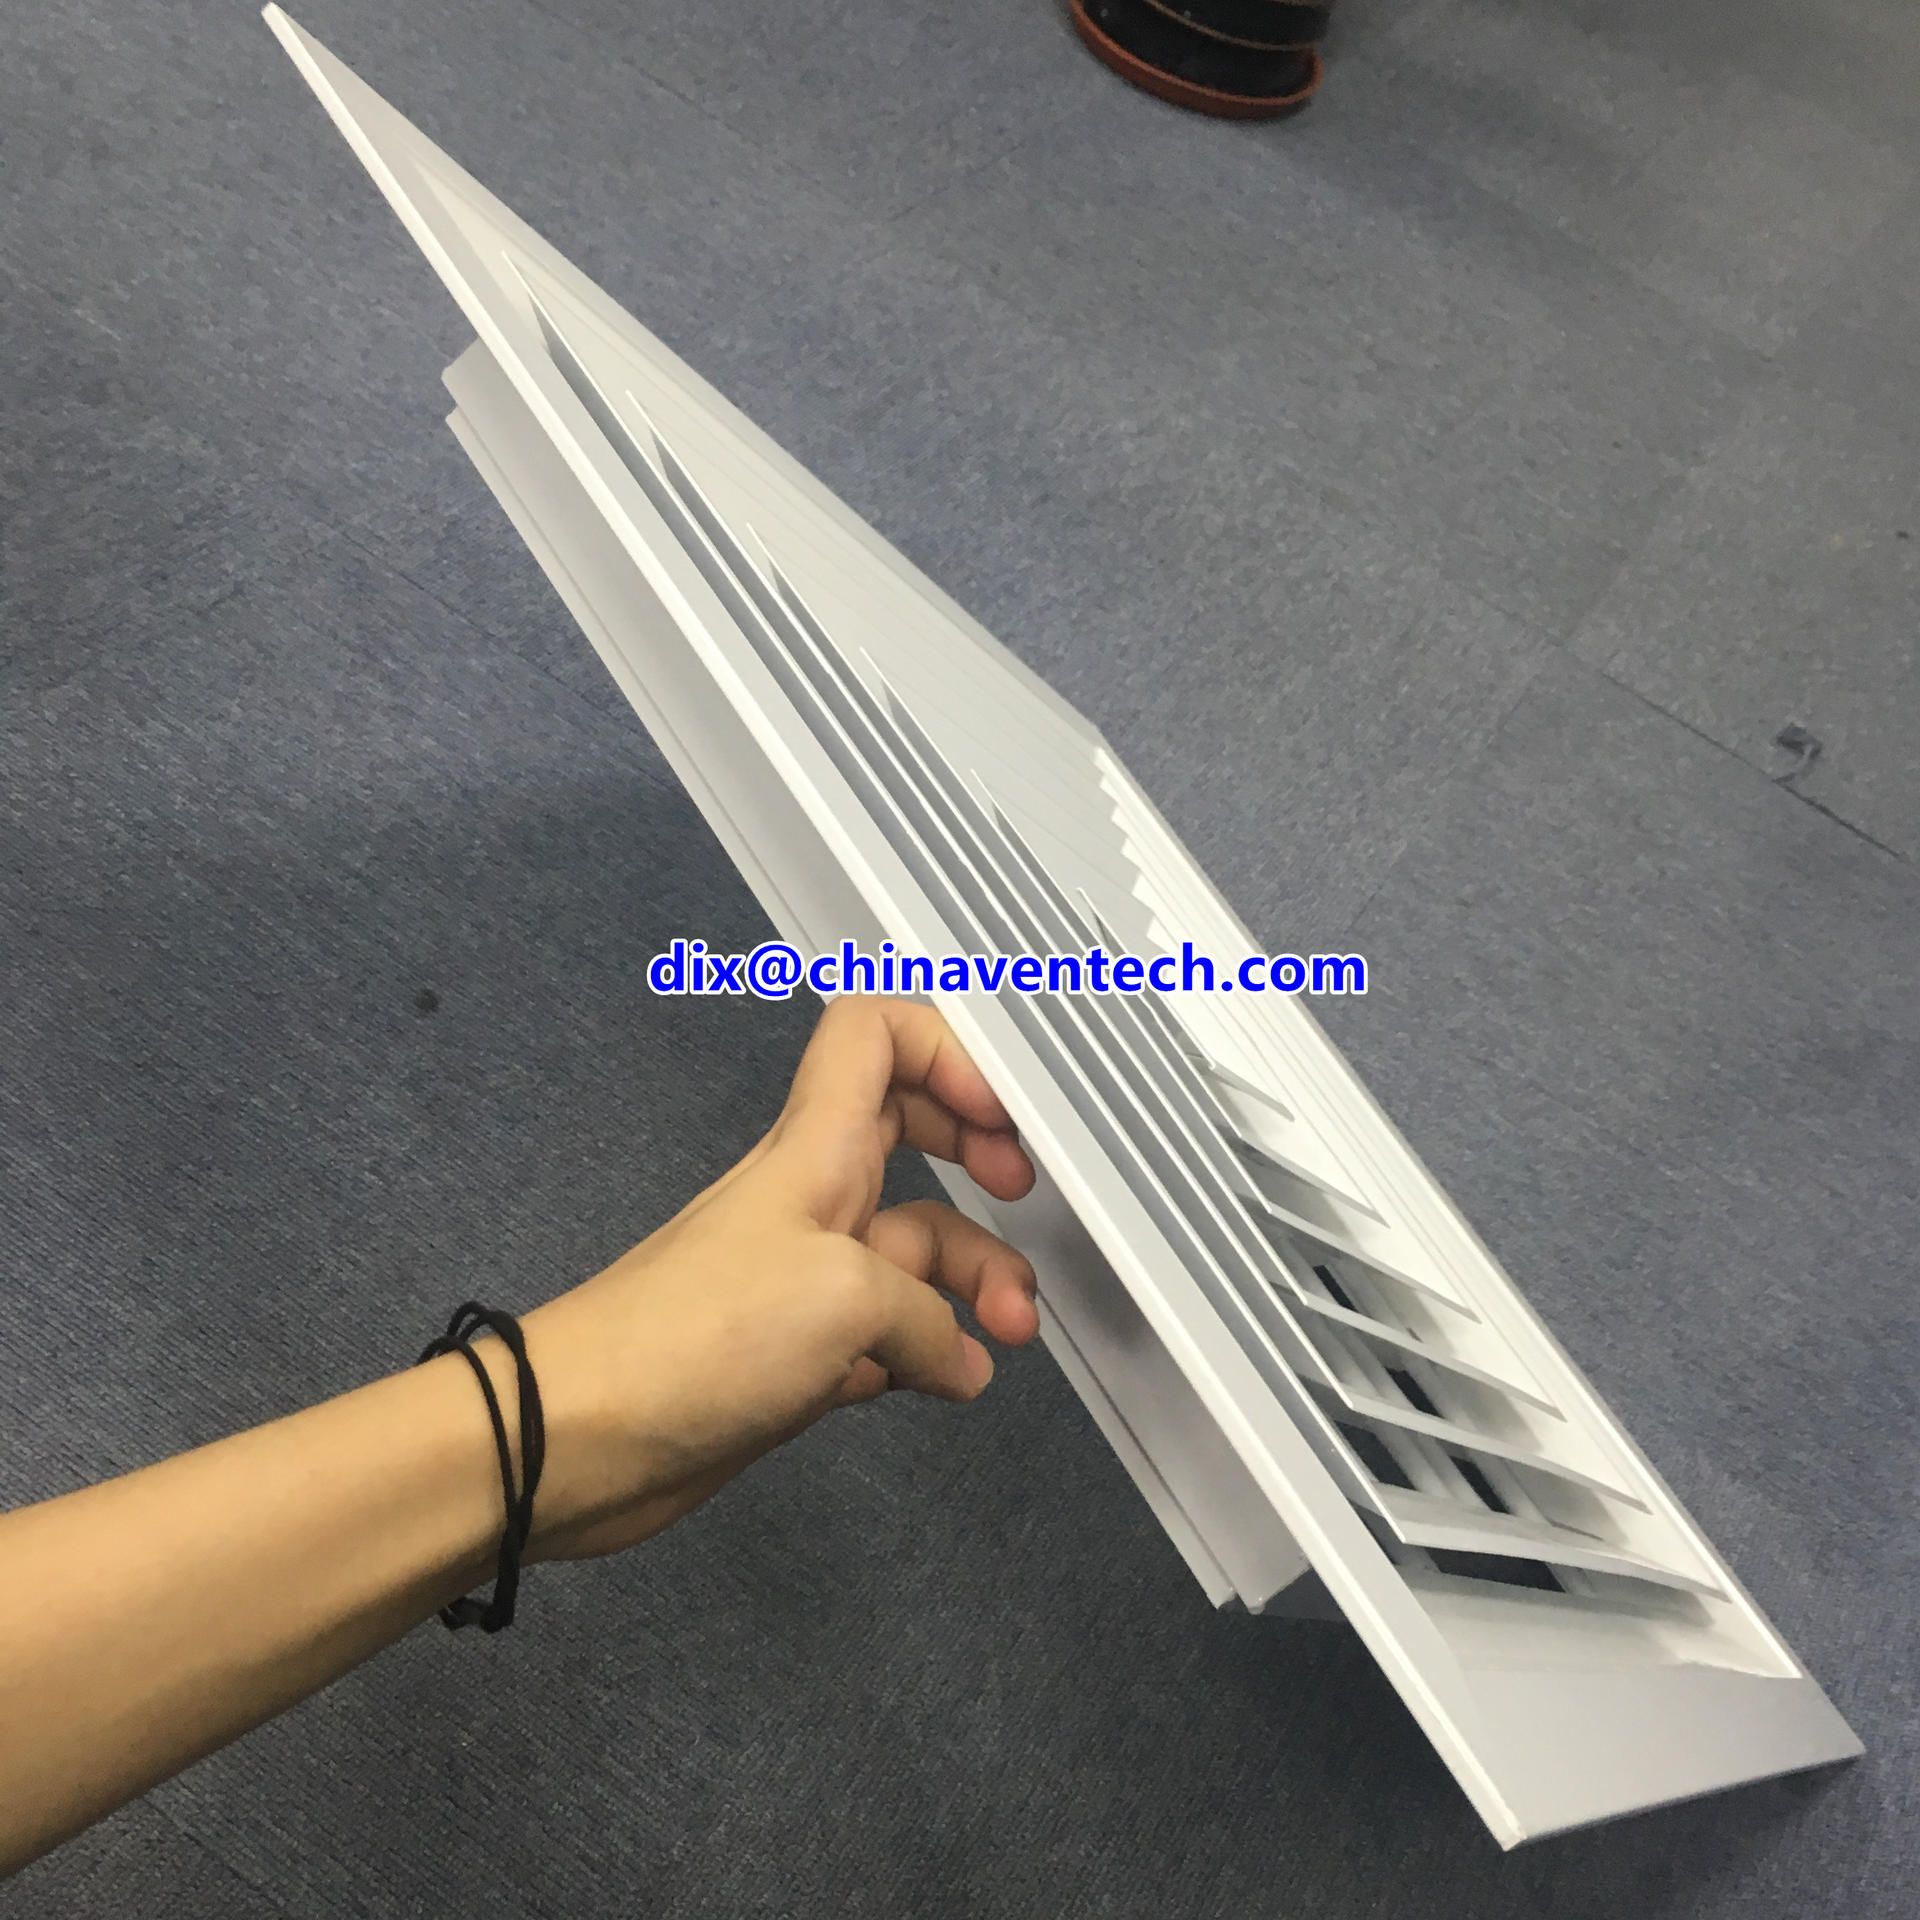 Hvac Commercial Air Conditioning Ceiling Ventilation Square 4 Way Diffuser